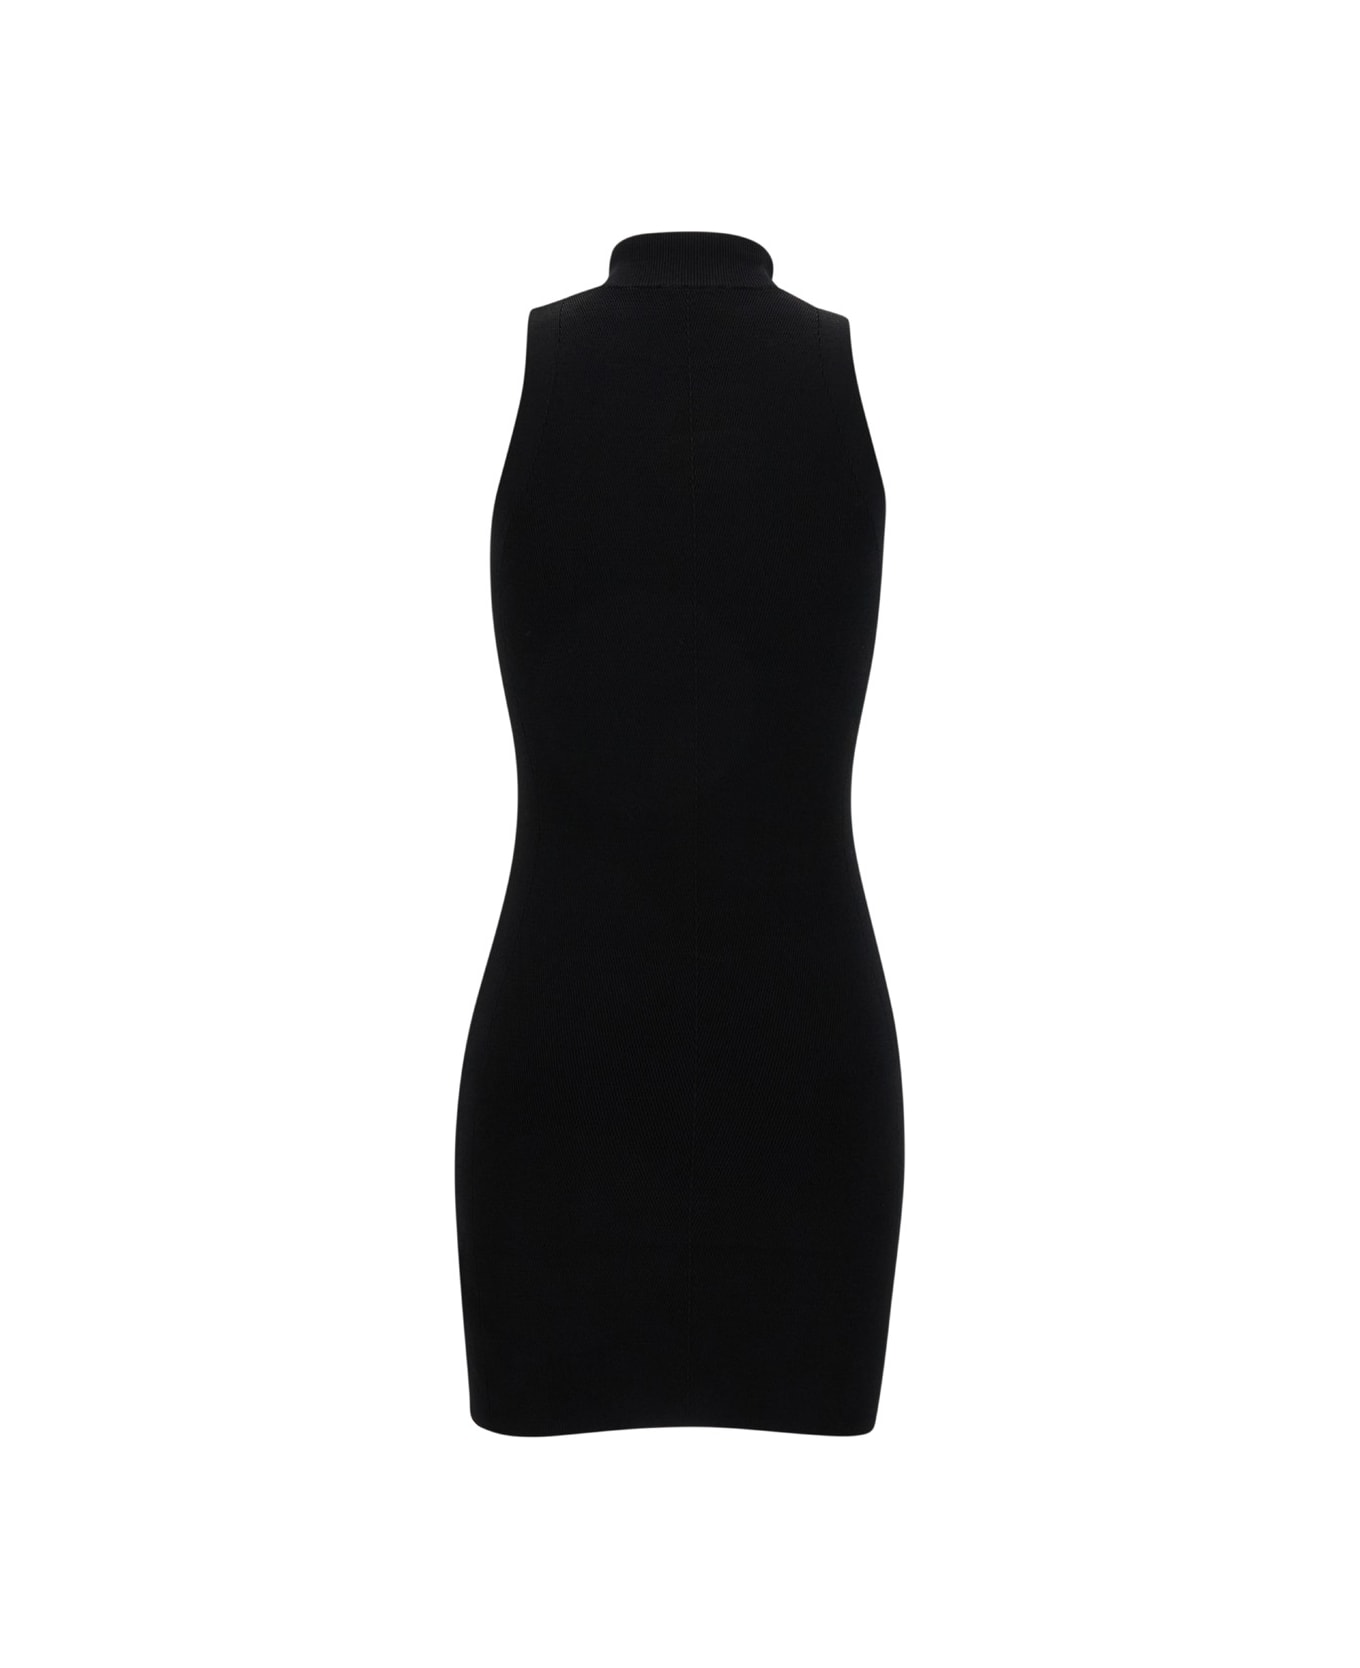 Diesel Mini Black Dress With Oval D Cut Out Detai In Viscose Womanl - Black